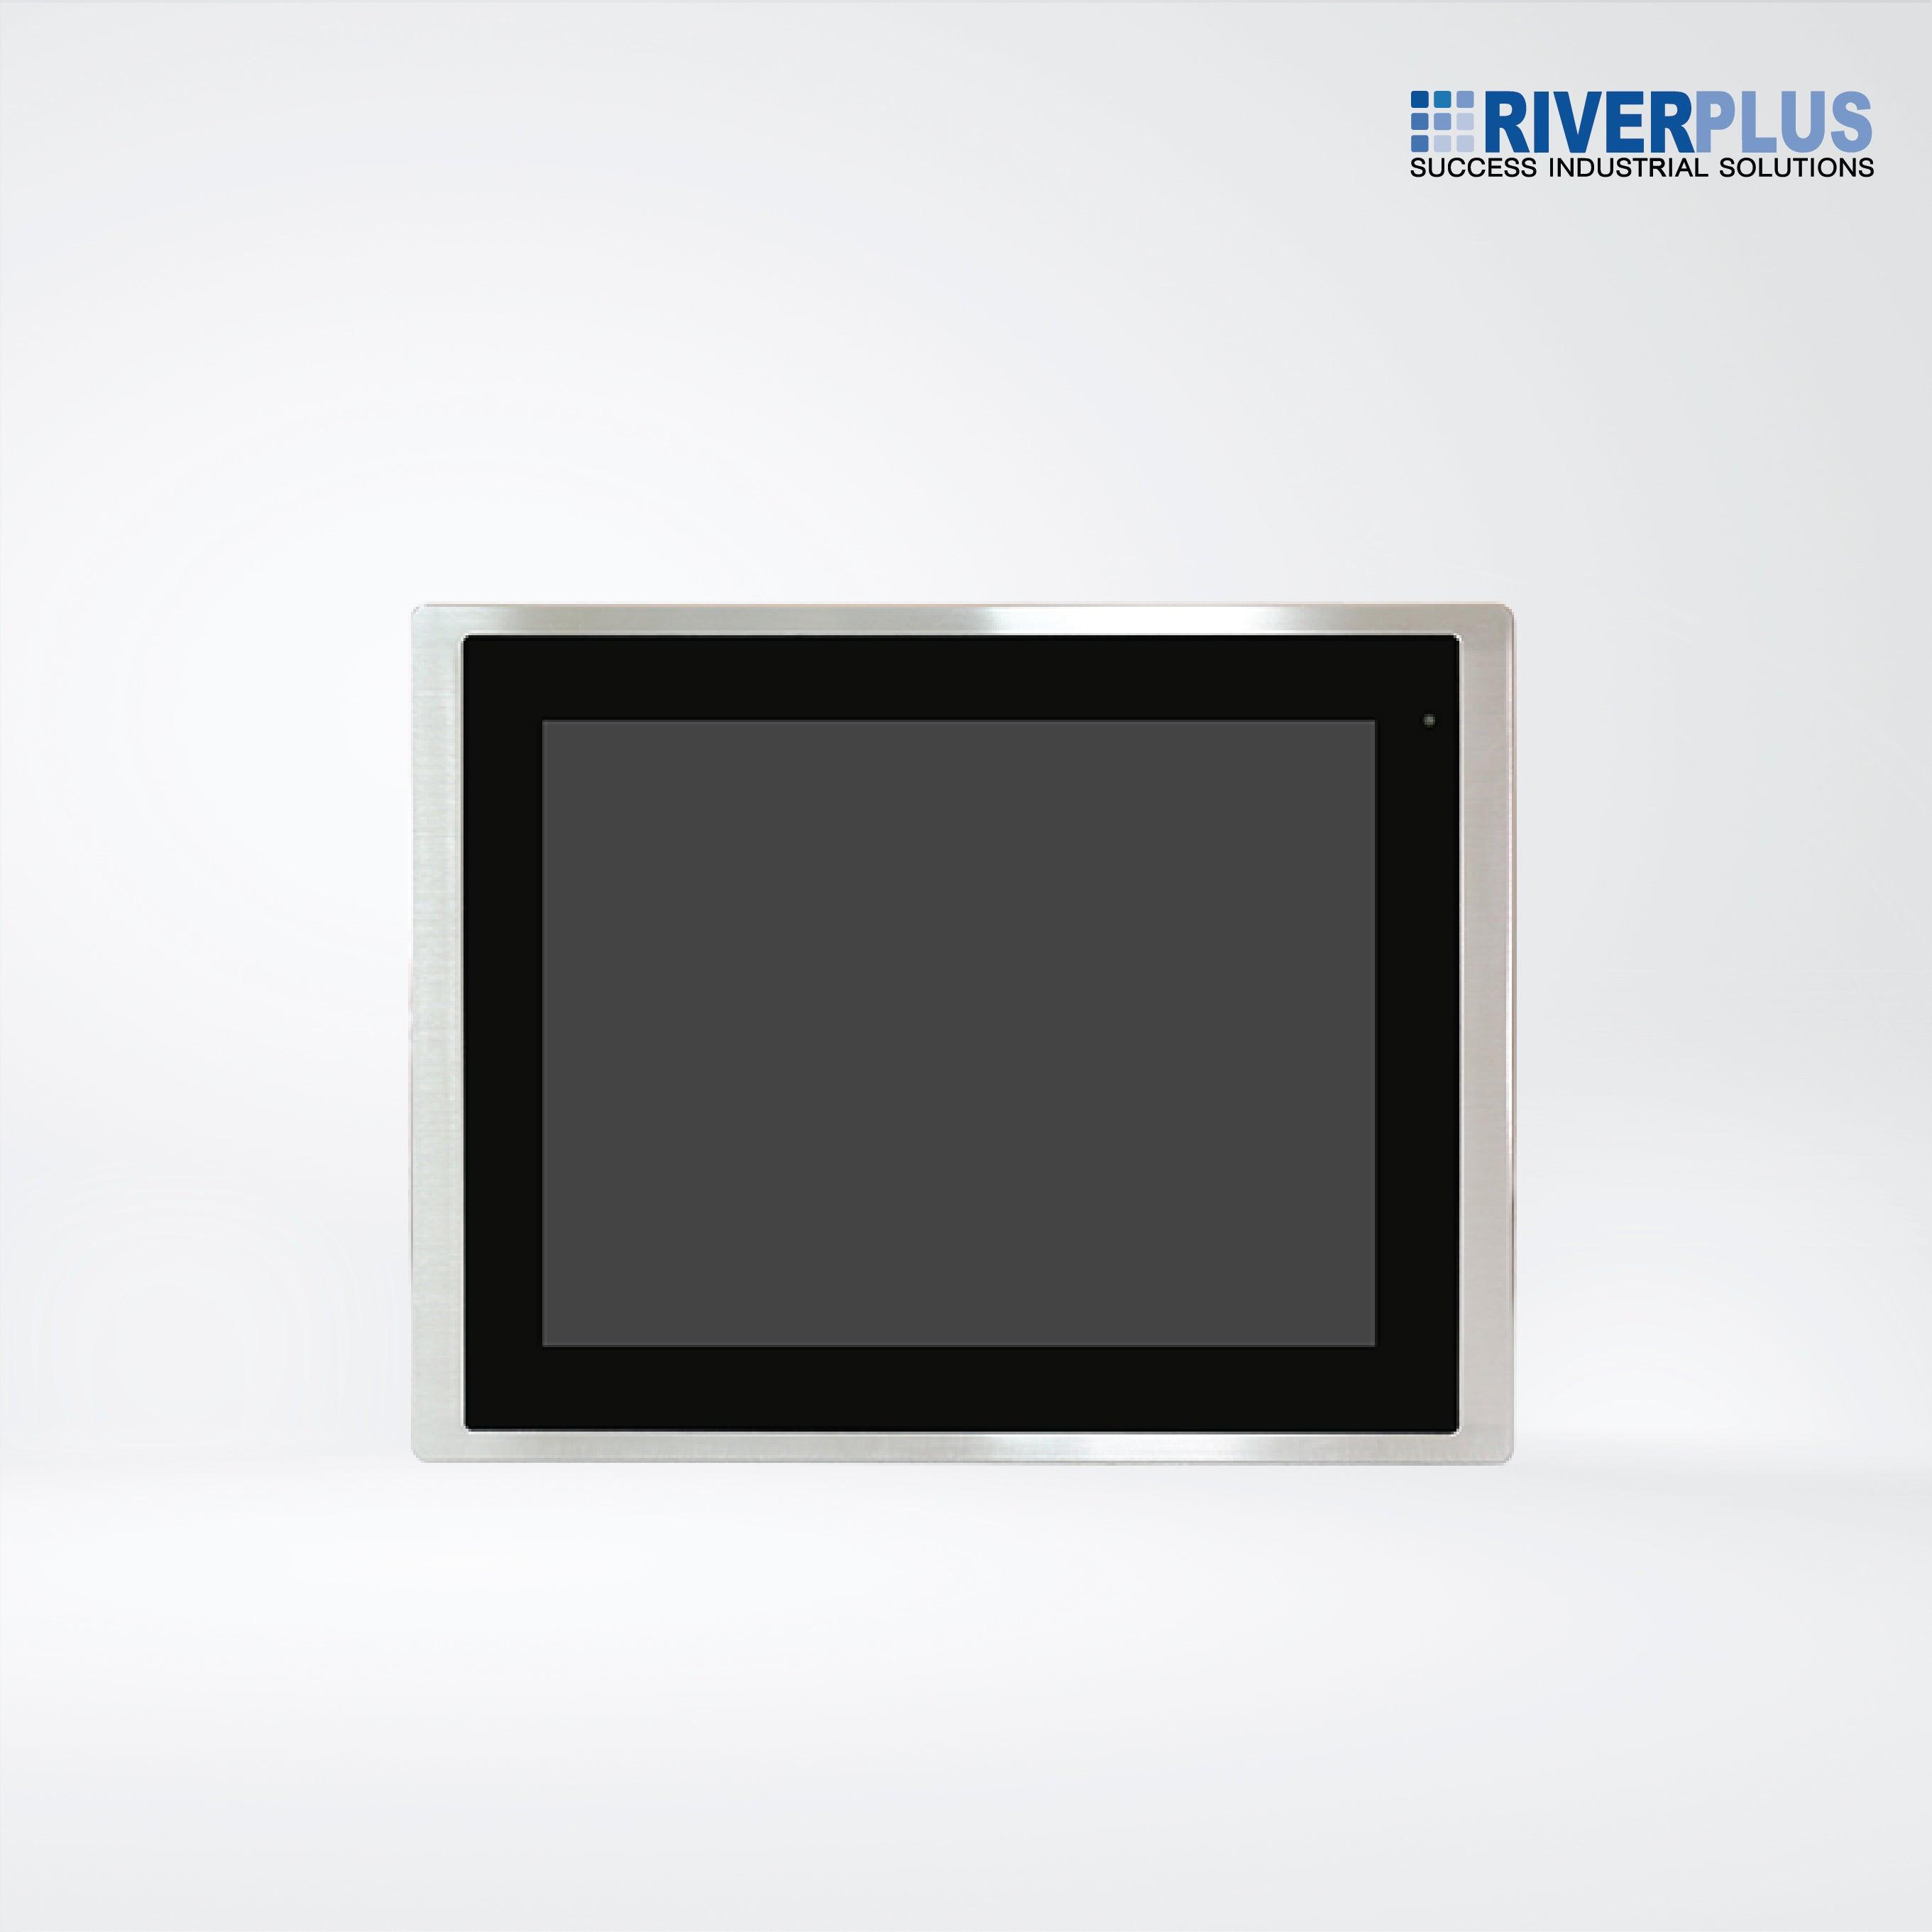 FABS-112PH 12.1” Flat Front Panel IP66 Stainless Chassis Display - Riverplus